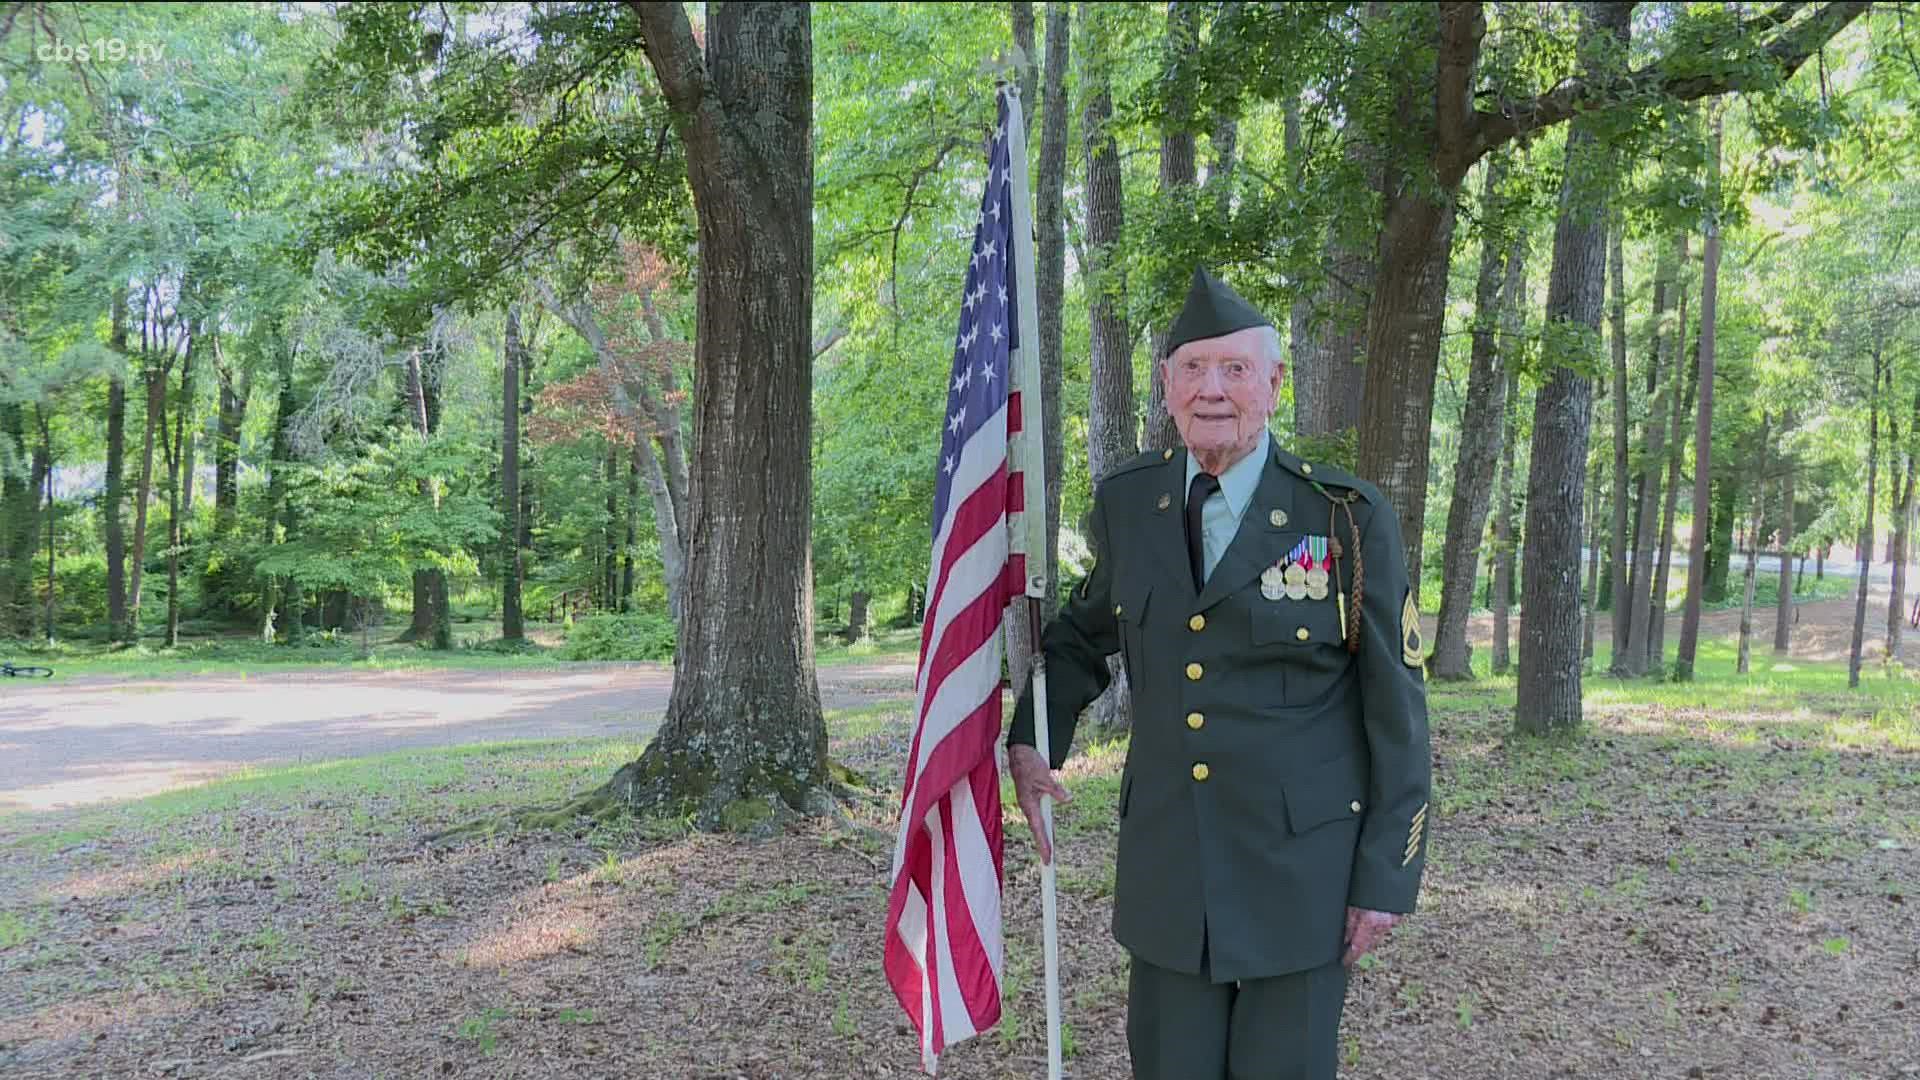 Dr. Jack Hetzel, 100, says "if I was called to active duty I'd say 'Yes sir. I'll be there.'"